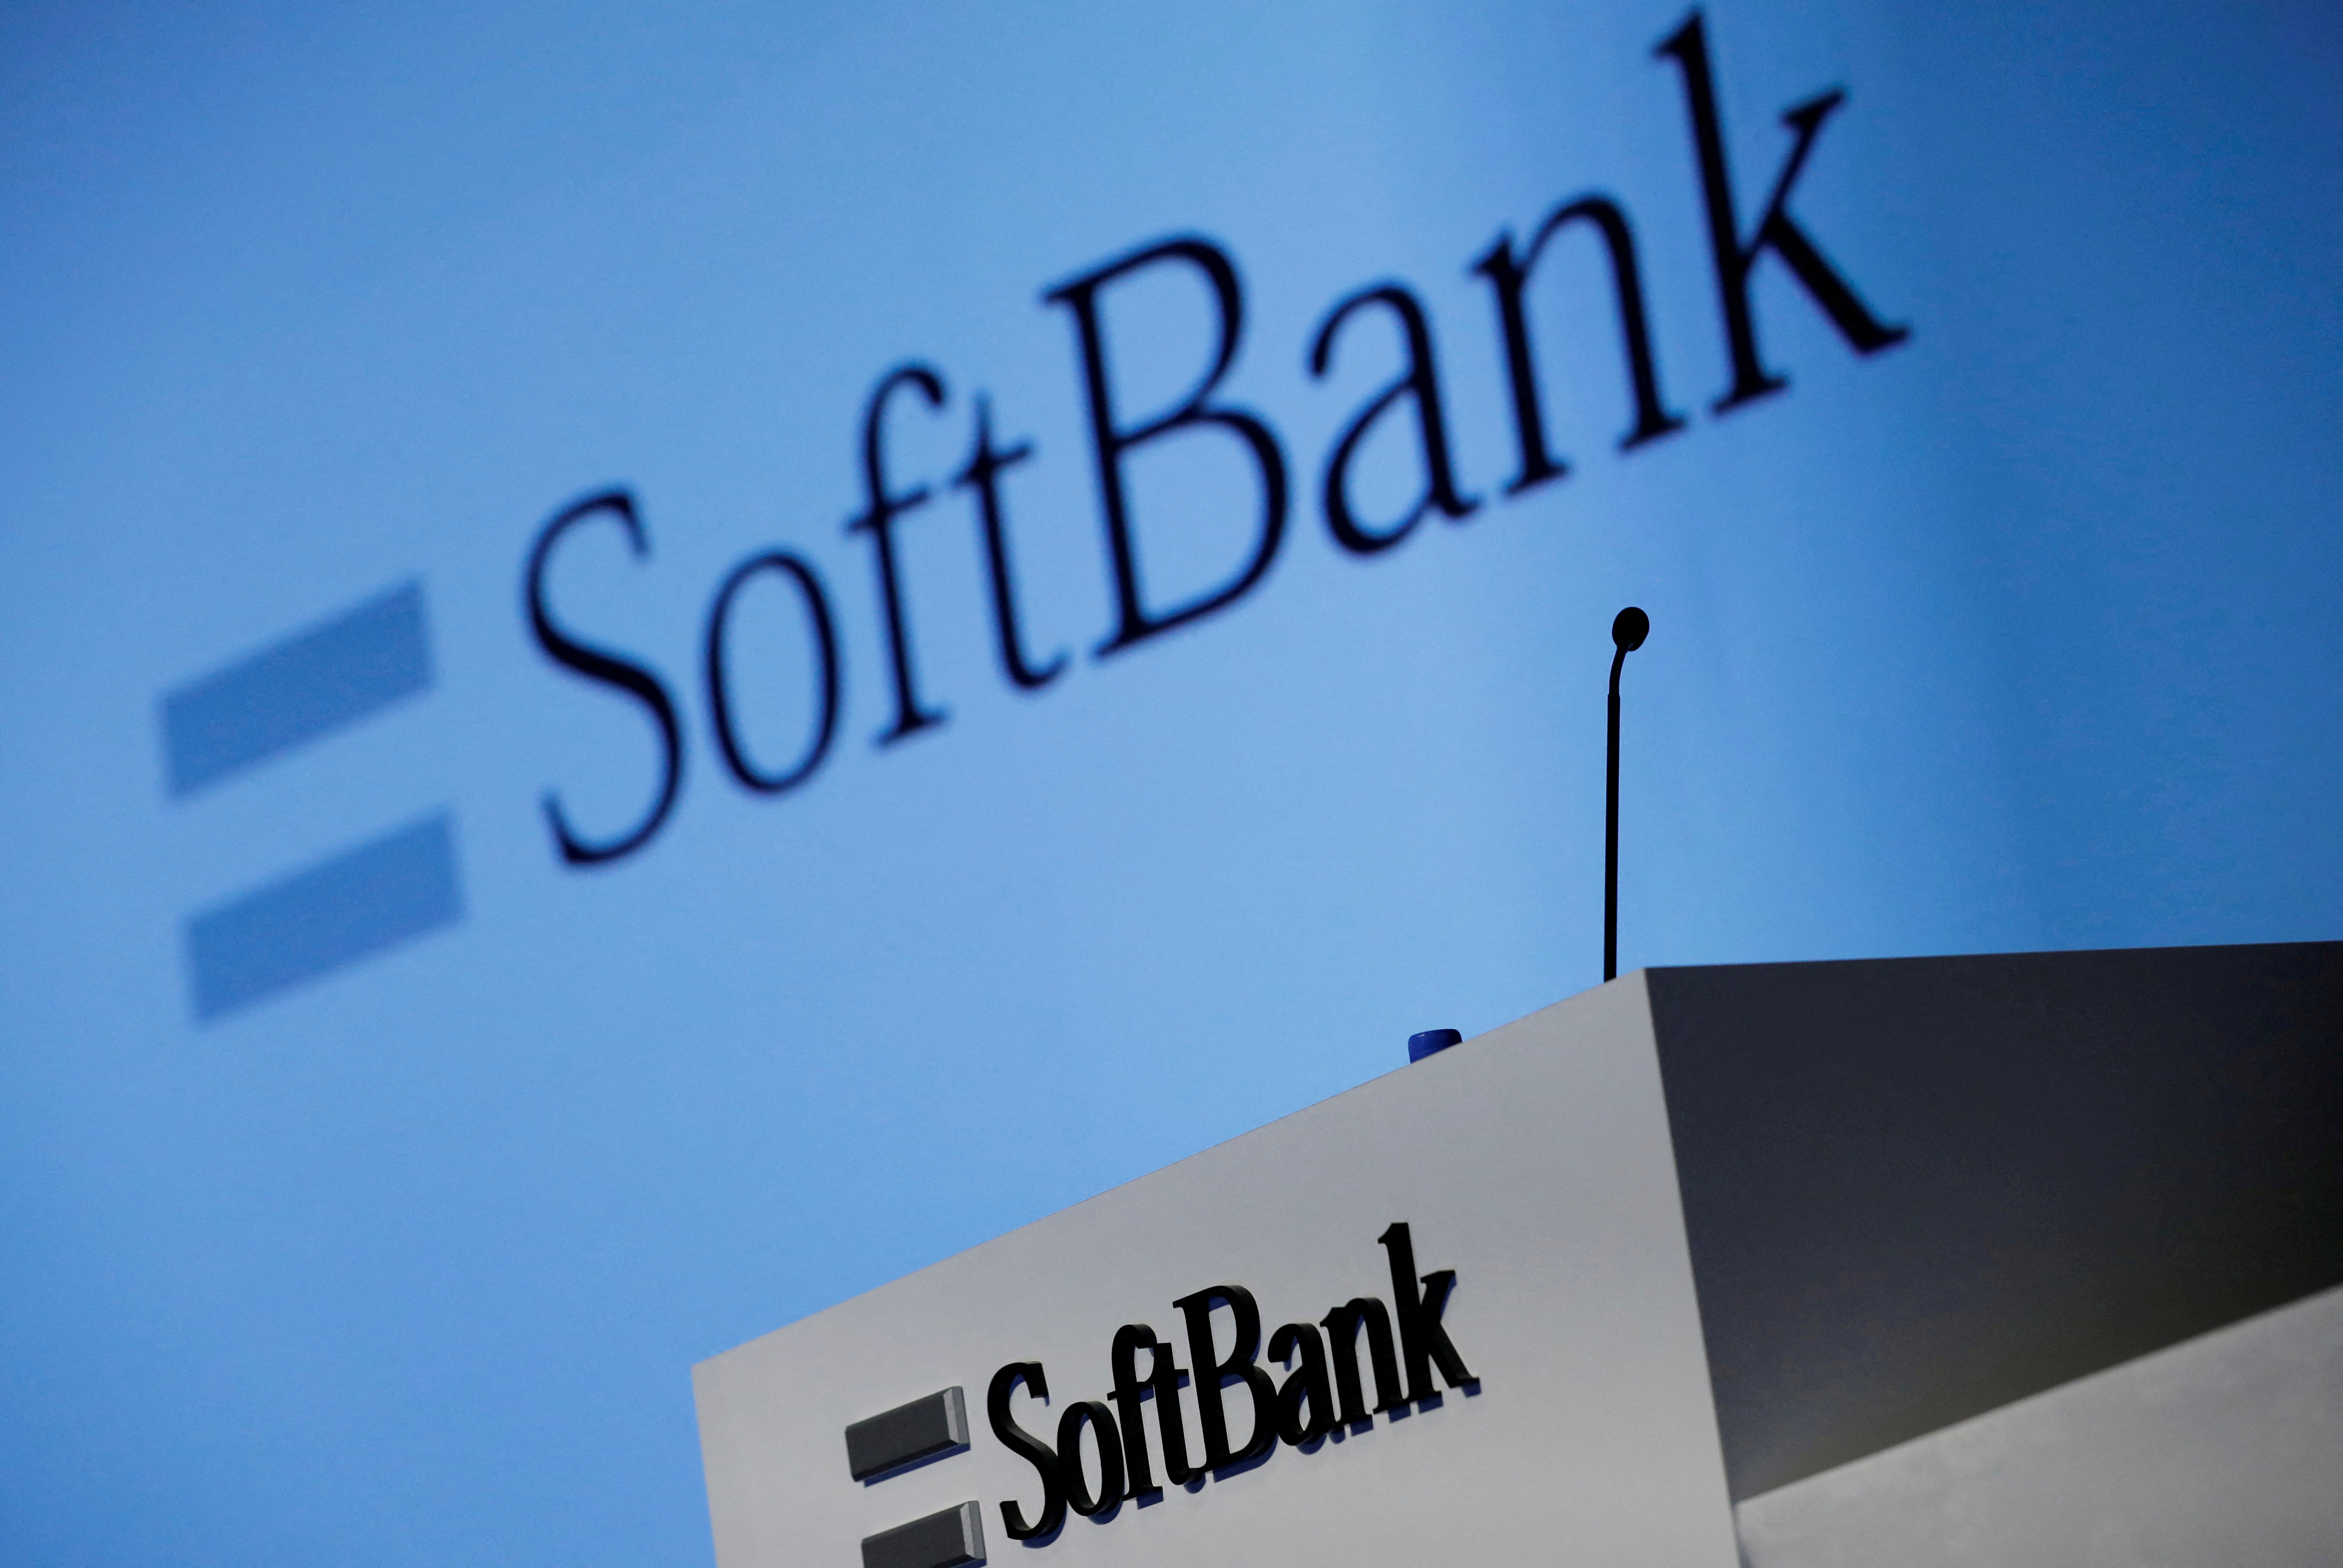 SoftBank's logo is pictured at a news conference in Tokyo, Japan, Feb. 4, 2021. REUTERS/Kim Kyung-Hoon/File Photo